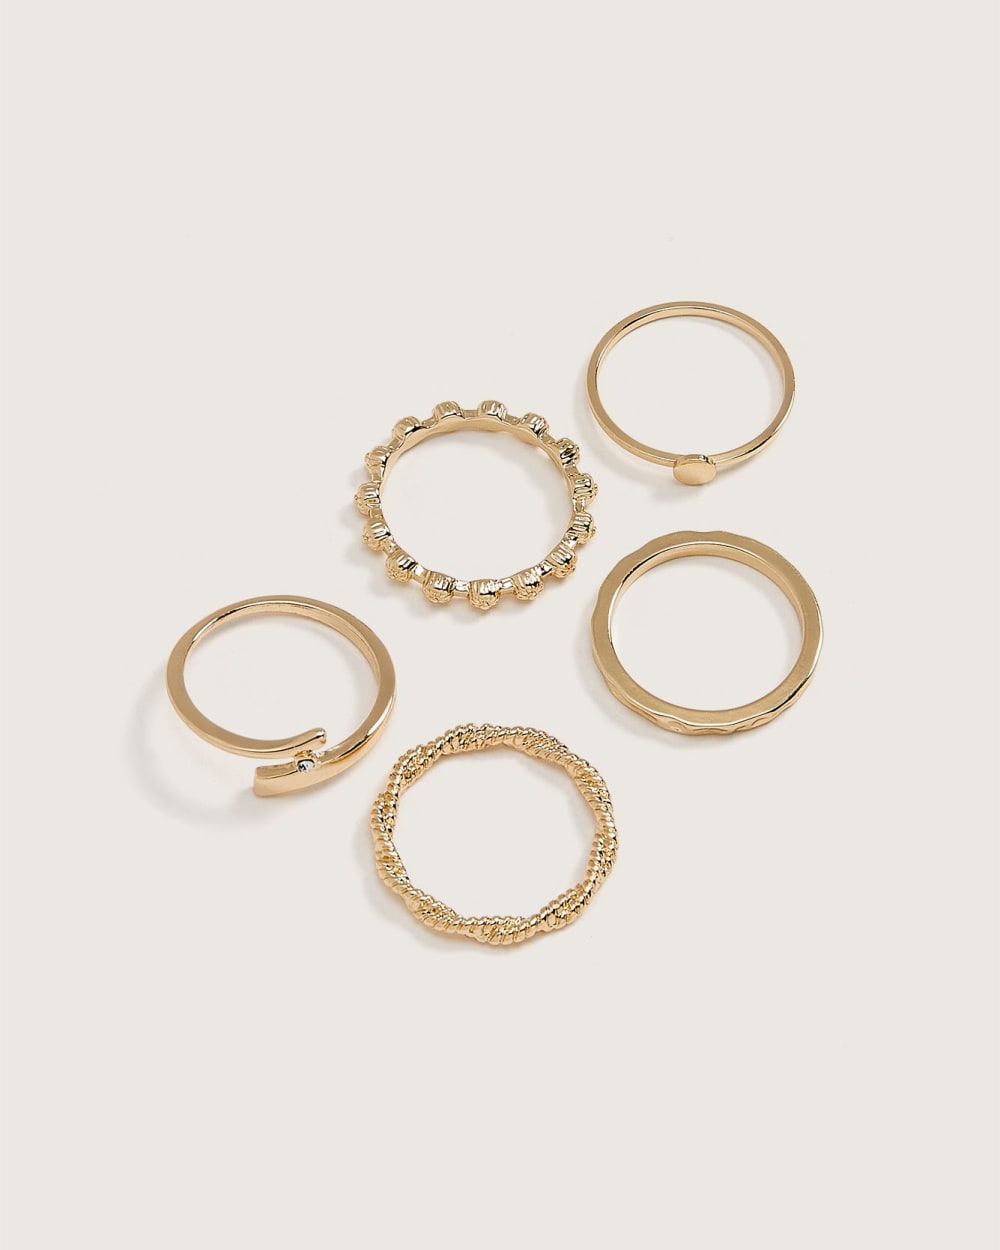 Assorted Golden Rings, Set of 5